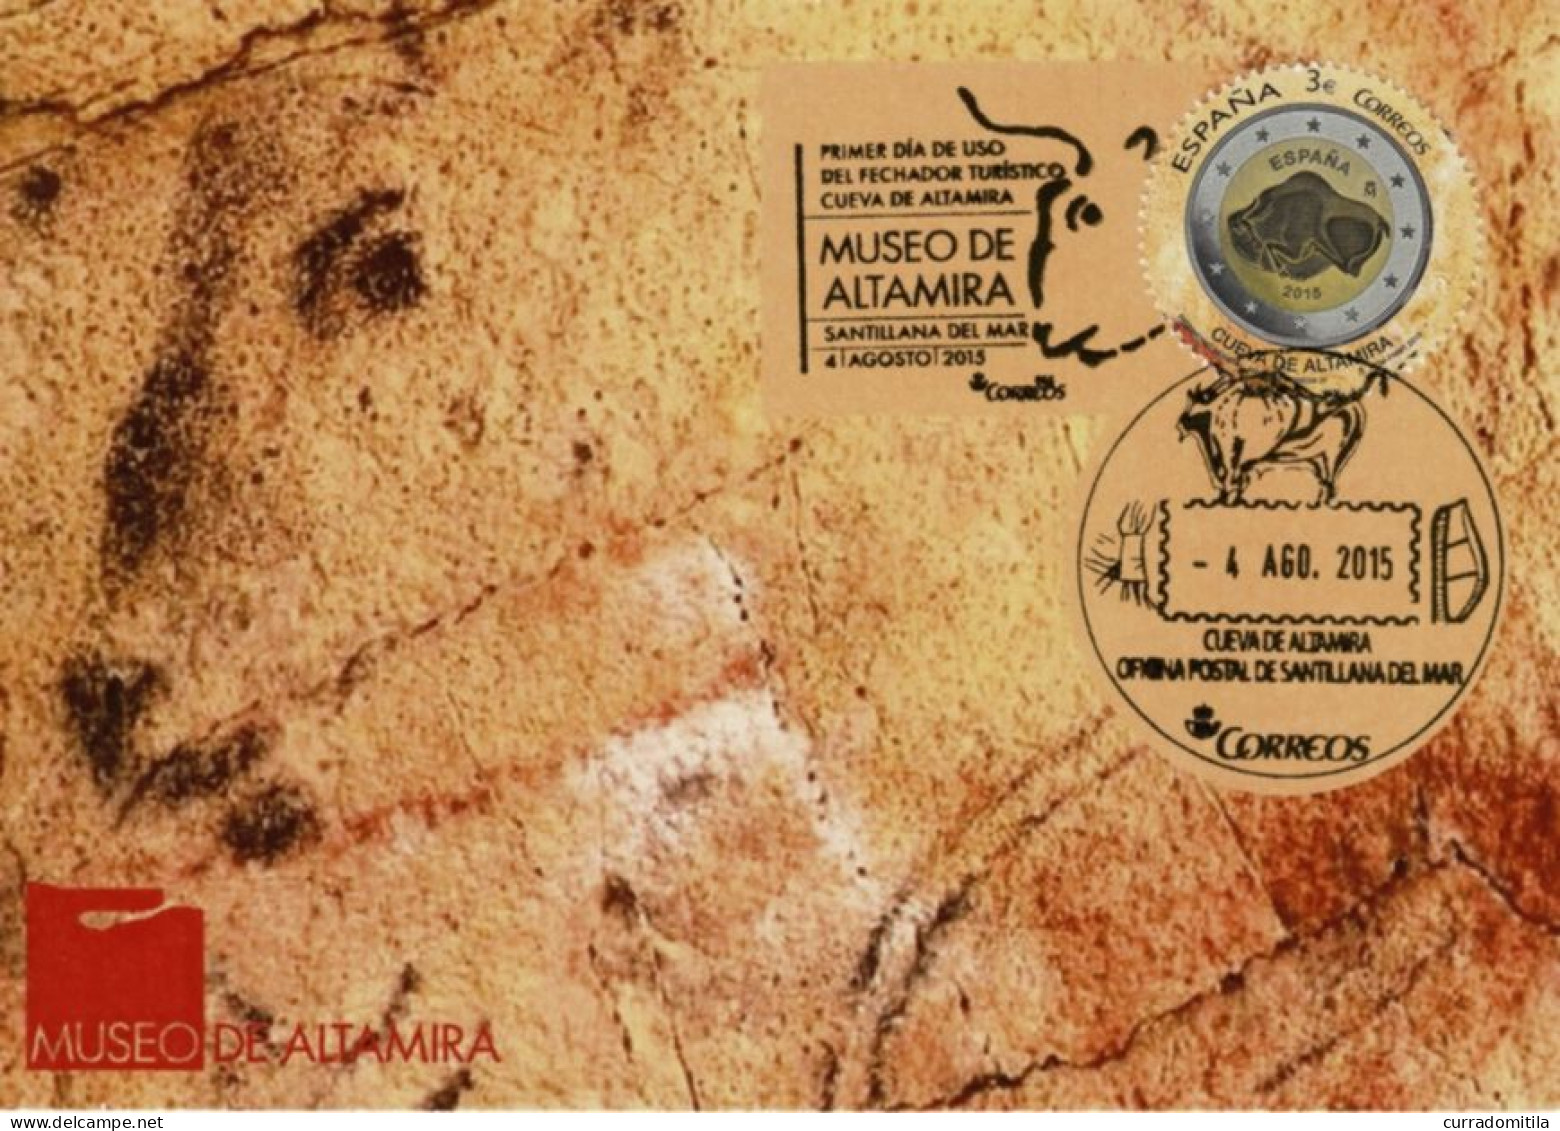 2015 Card (Large) With Rock Art Cancellations, Prehistoric Bison Of Altamita And Special Stamp Of Altamira - Arqueología